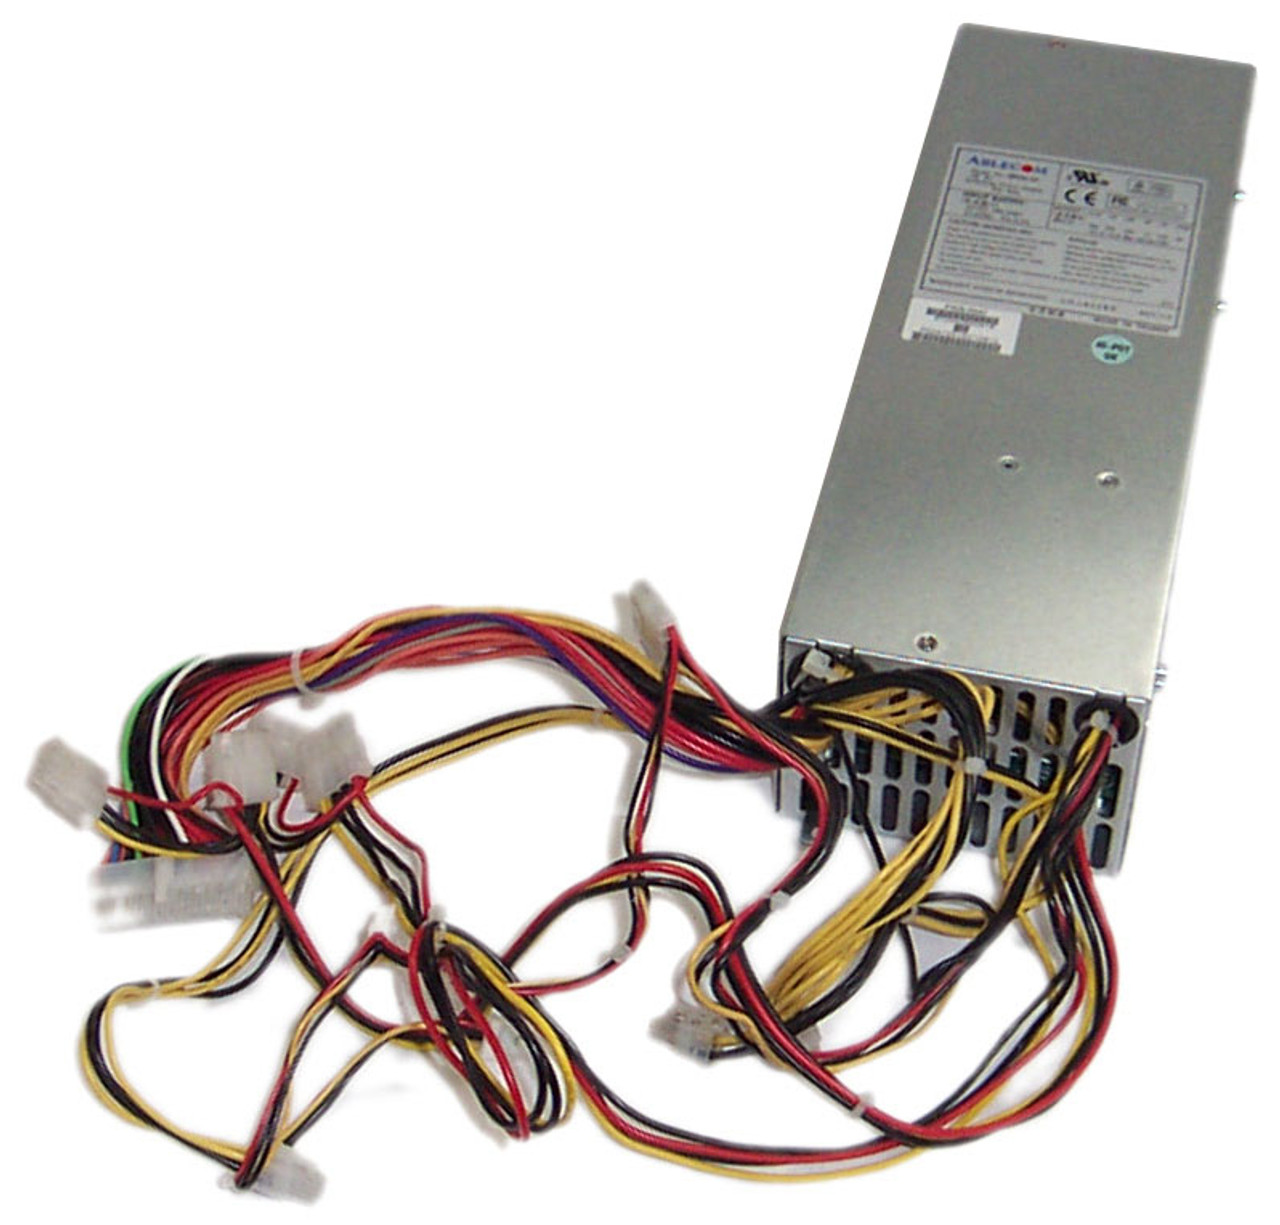 SP-552-2C SuperMicro 550 Watts 35a 24-Pin 2U Compatible Power Supply